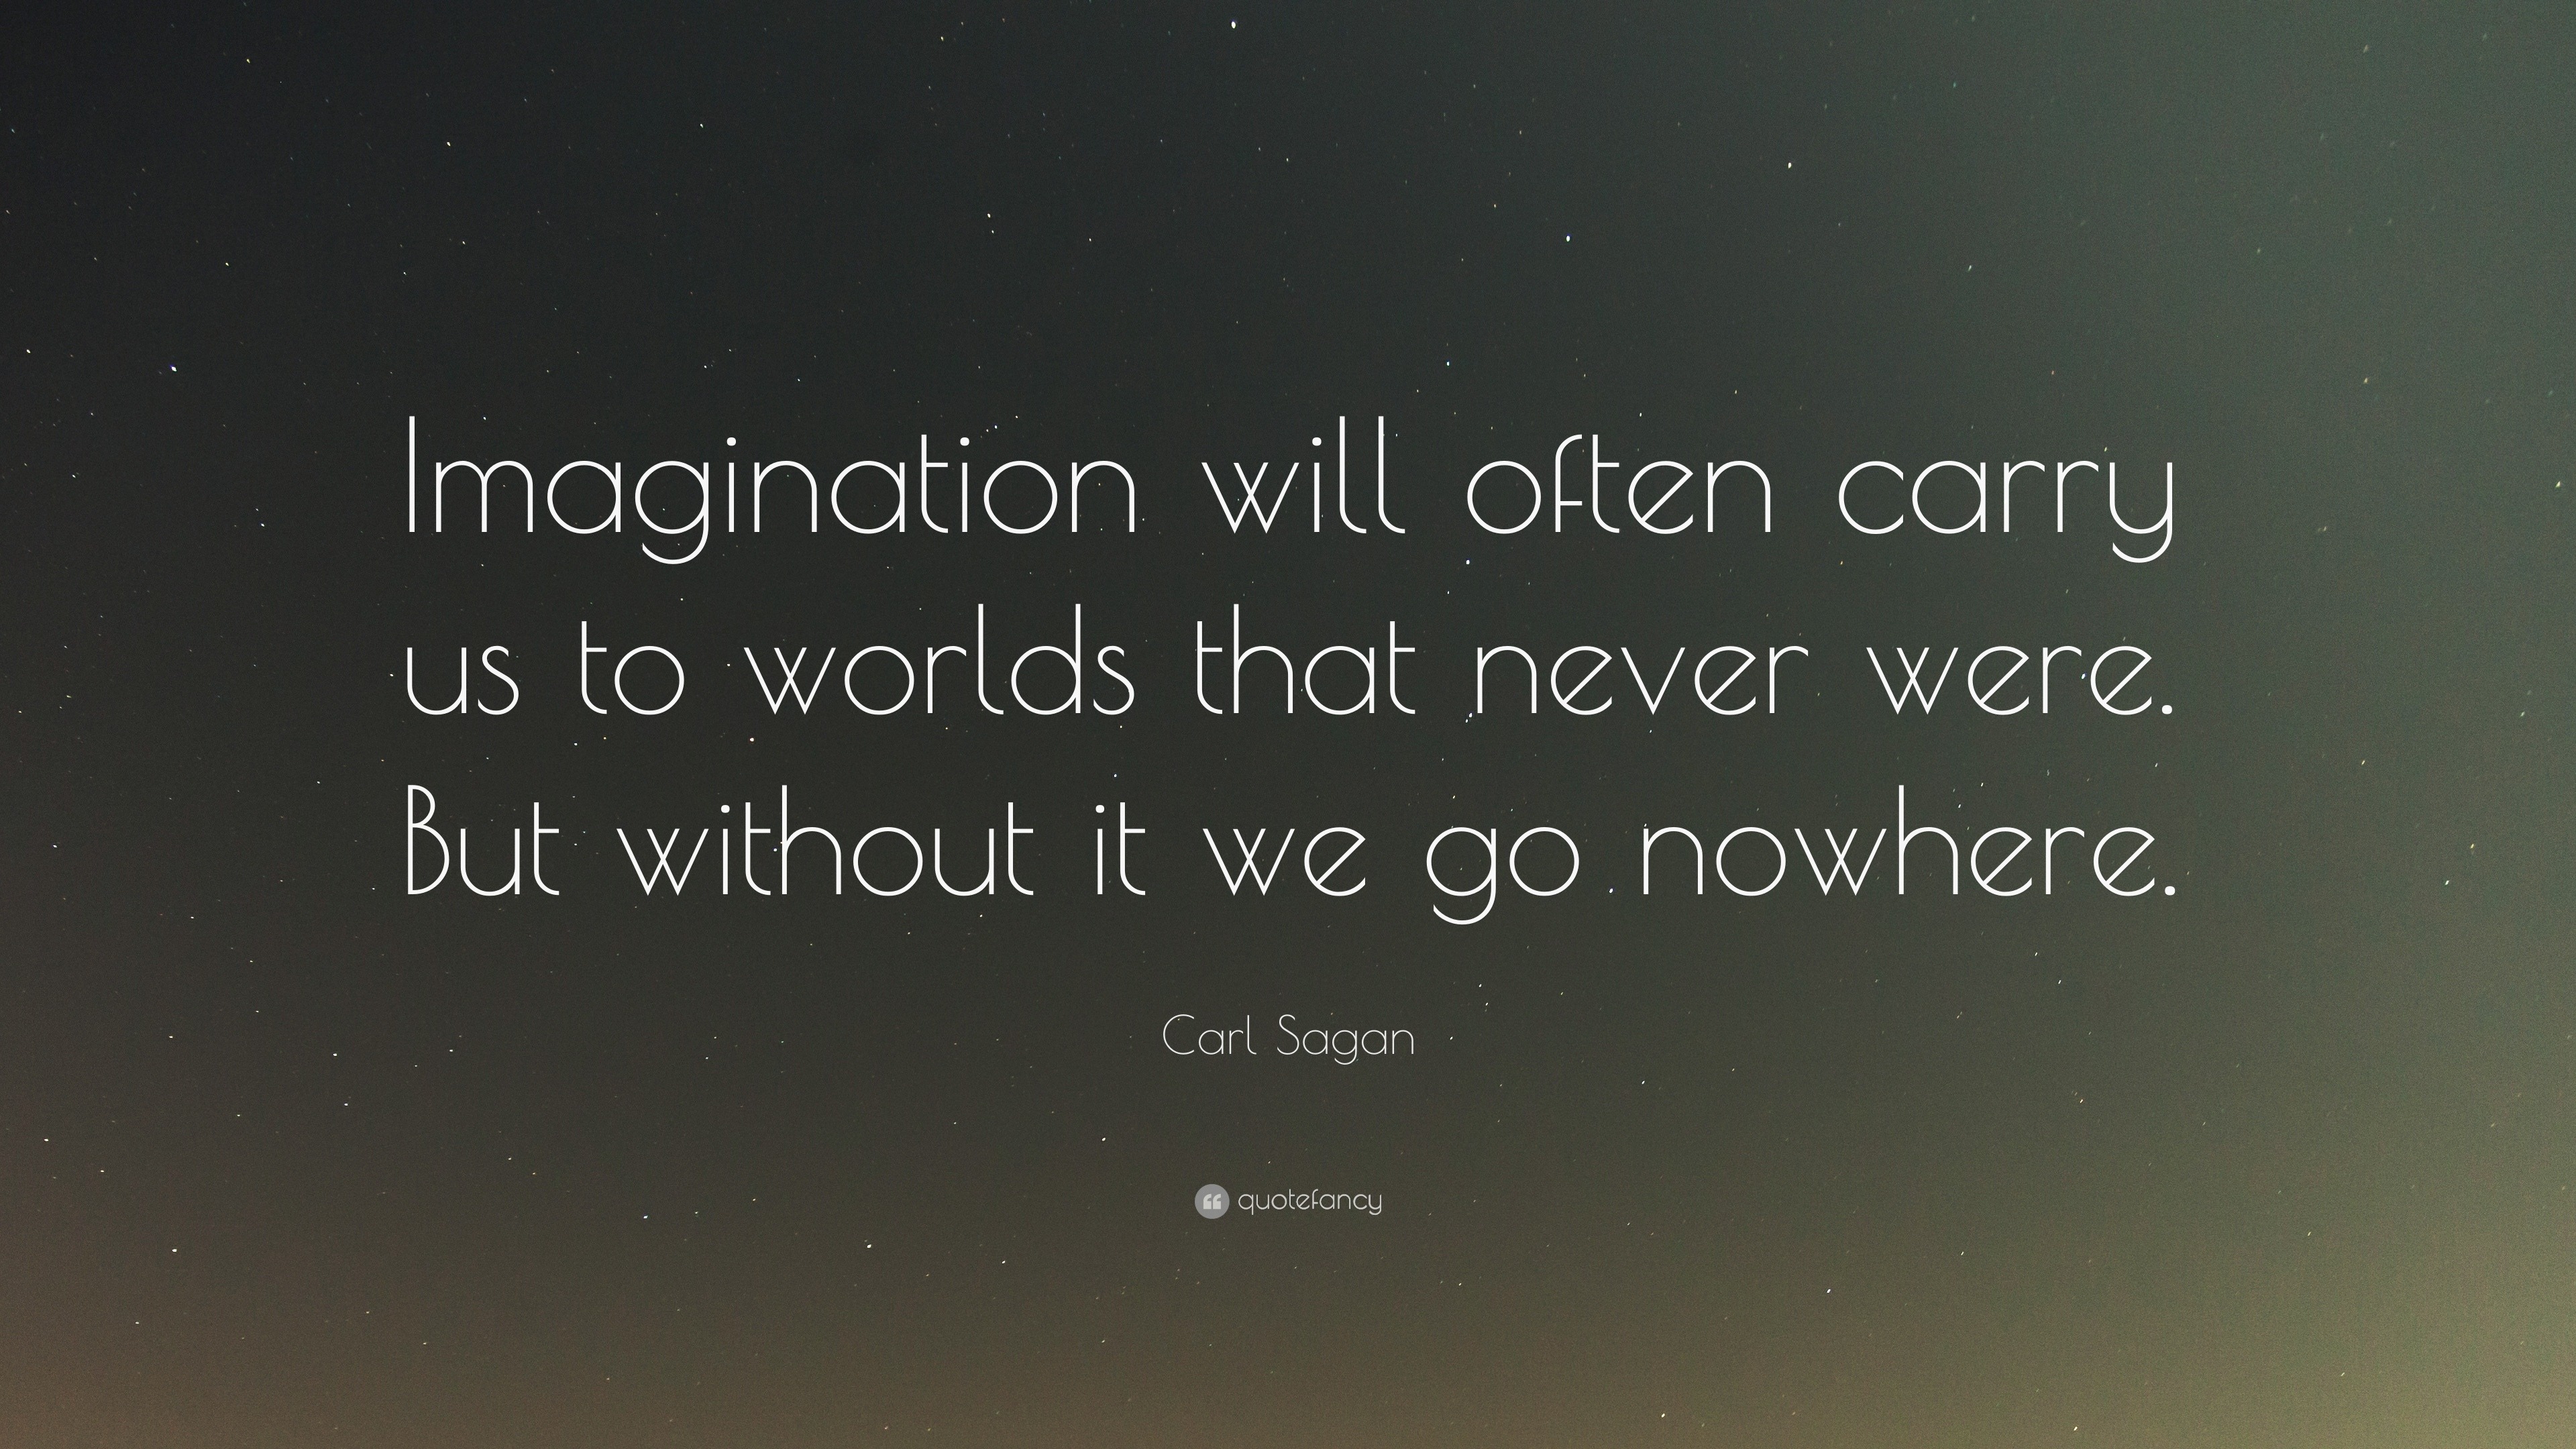 Carl Sagan Quote “Imagination will often carry us to worlds that never were